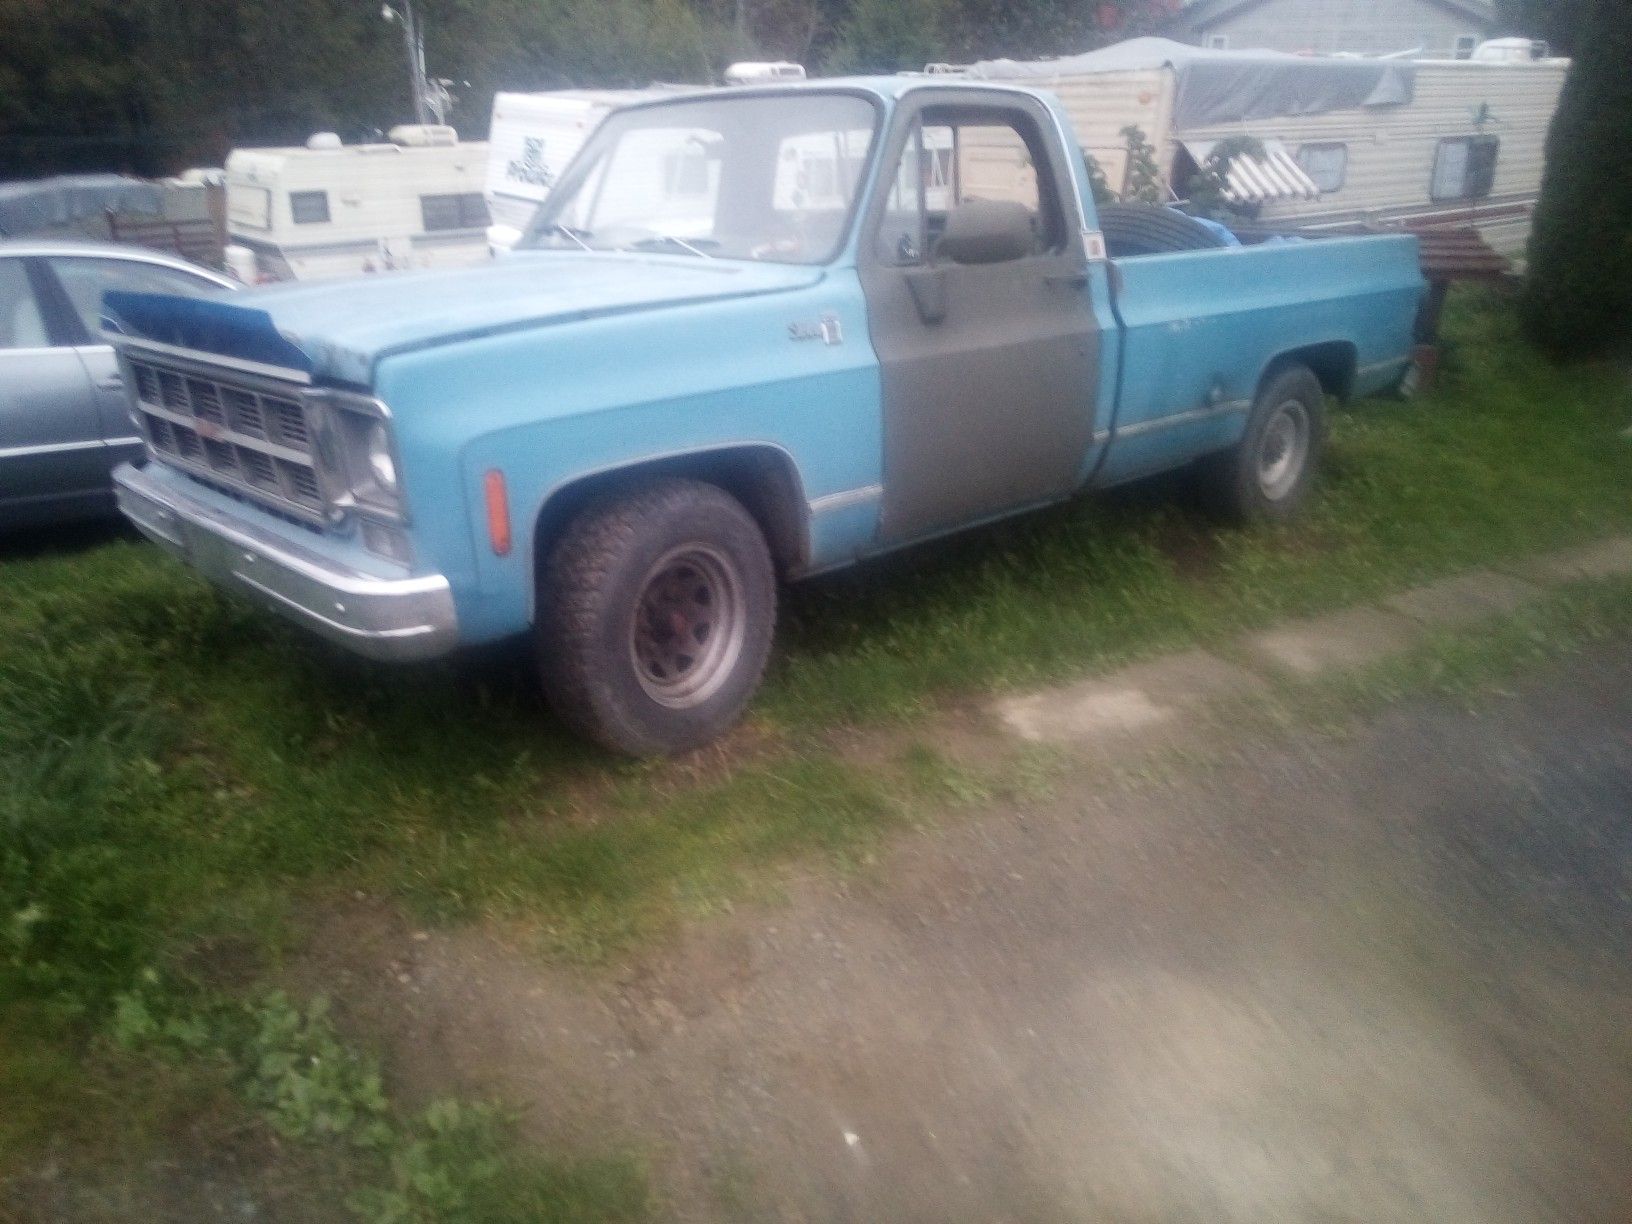 79 Chev p/u parting out